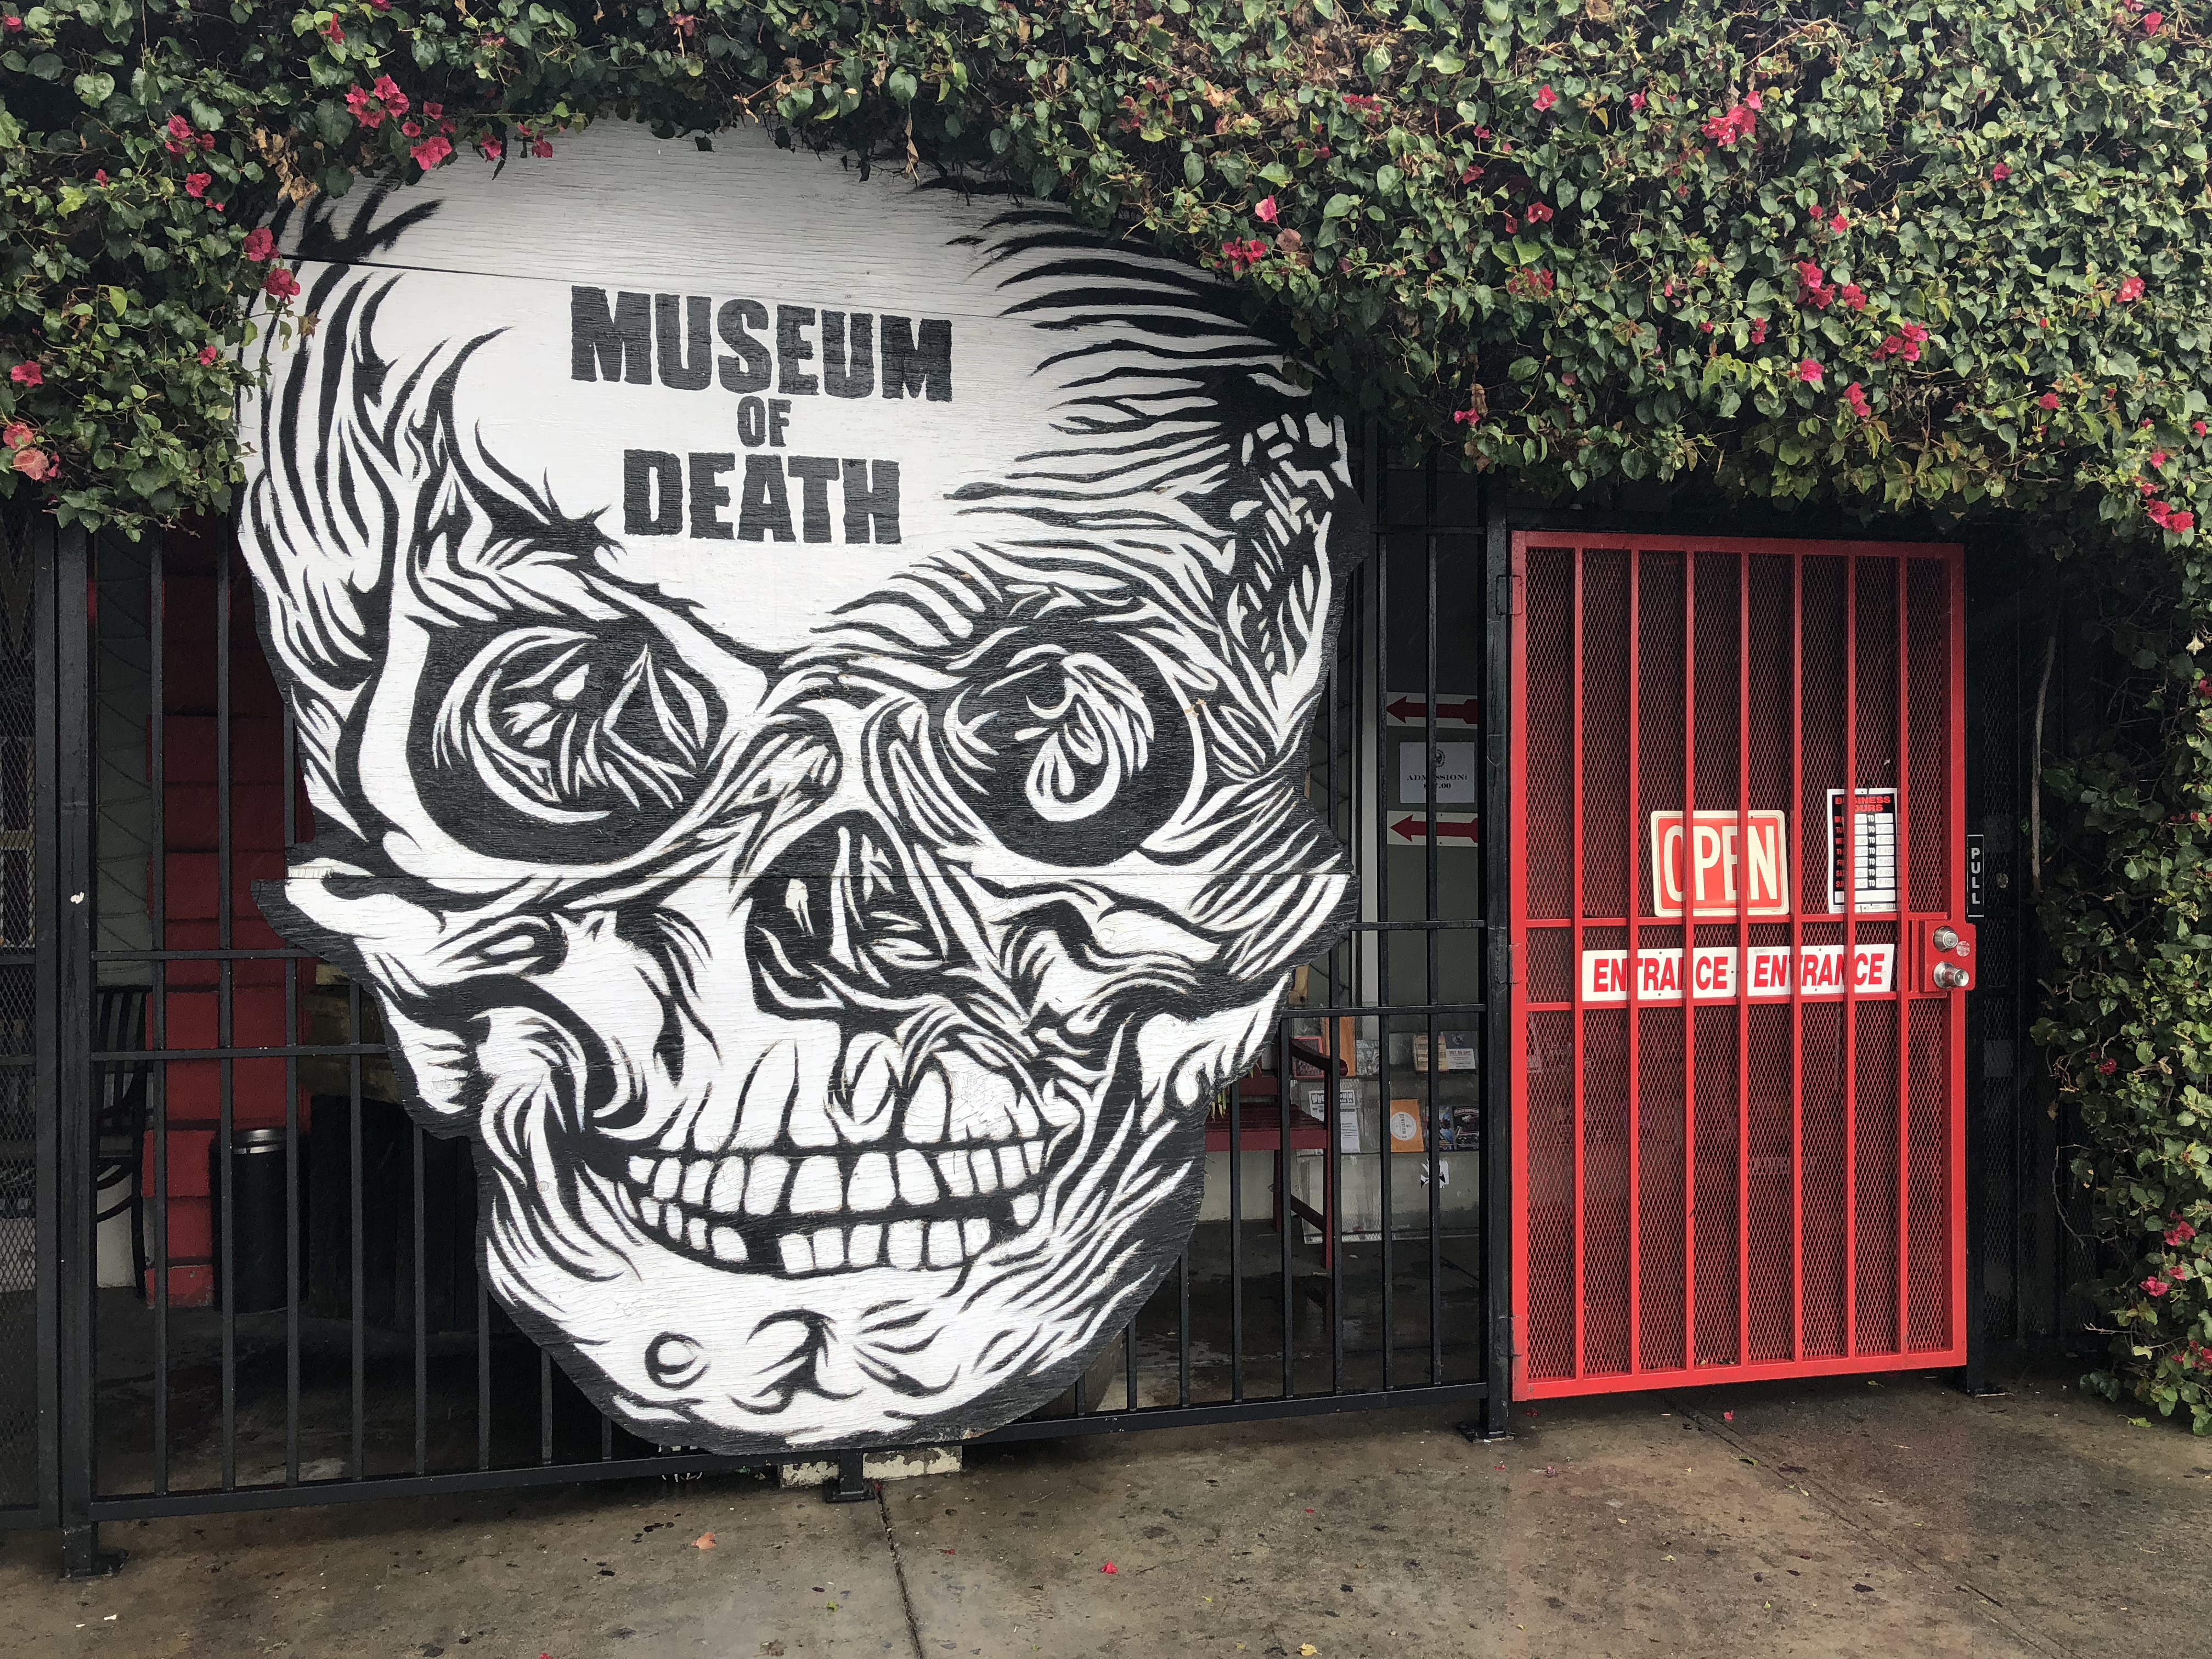 The entrance to the Museum of Death